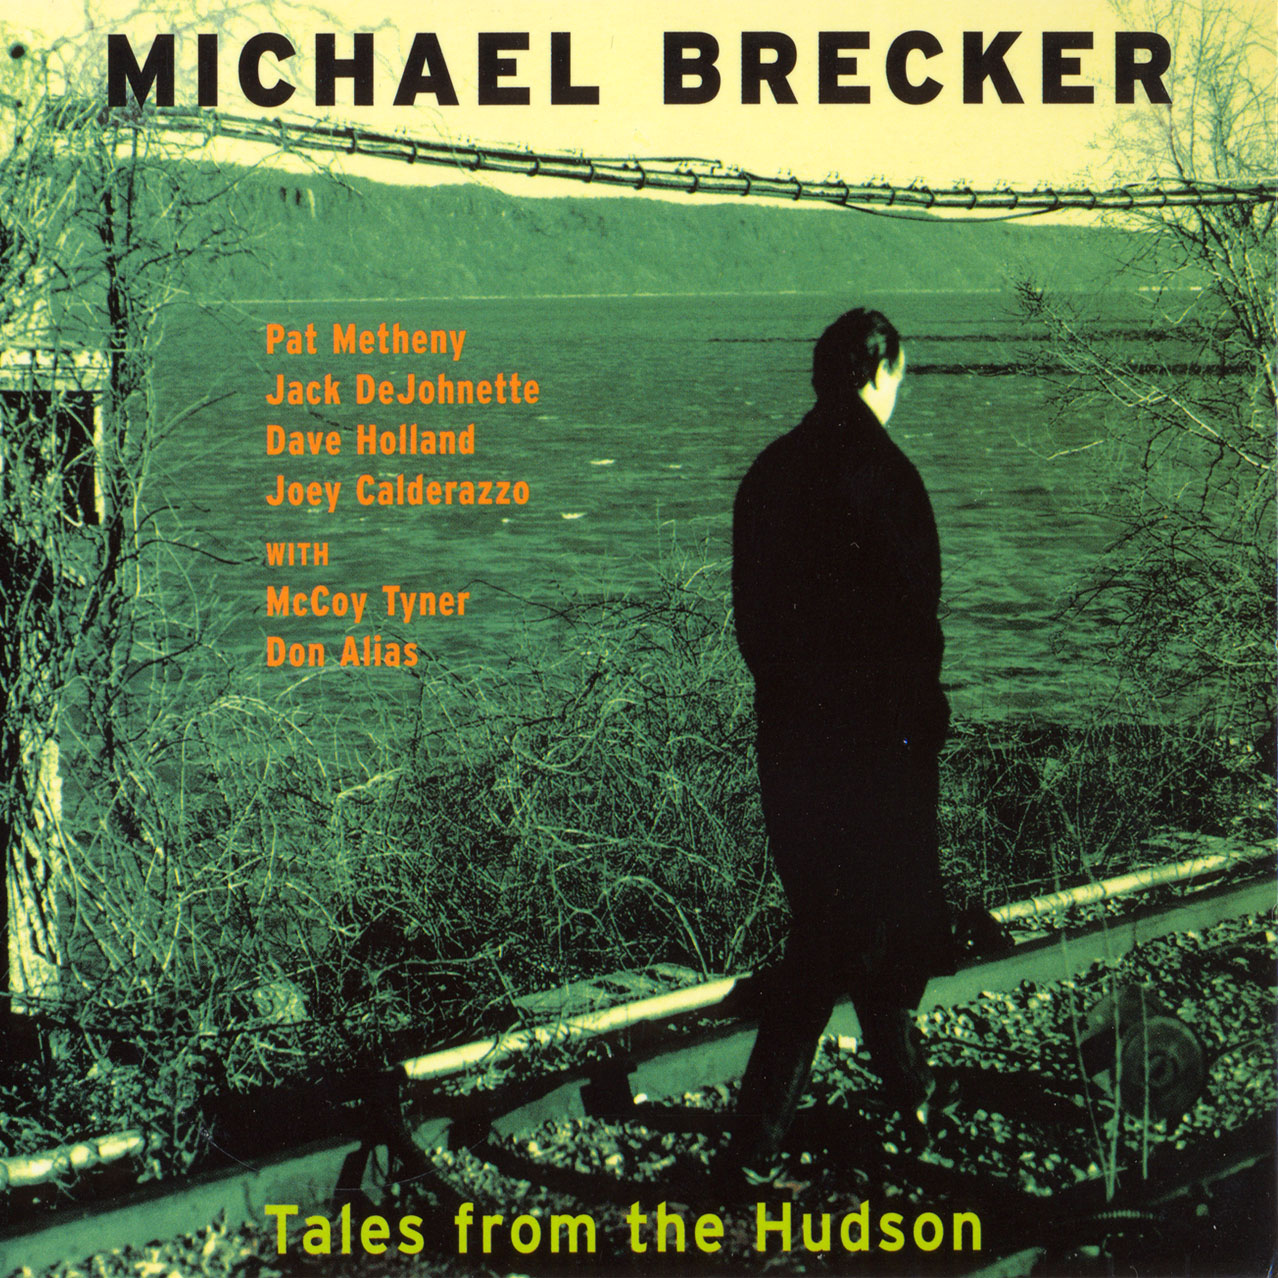 Bluebell finished Collision course Michael Brecker - 1996 "Tales from the Hudson" - Jazz Rock Fusion Guitar